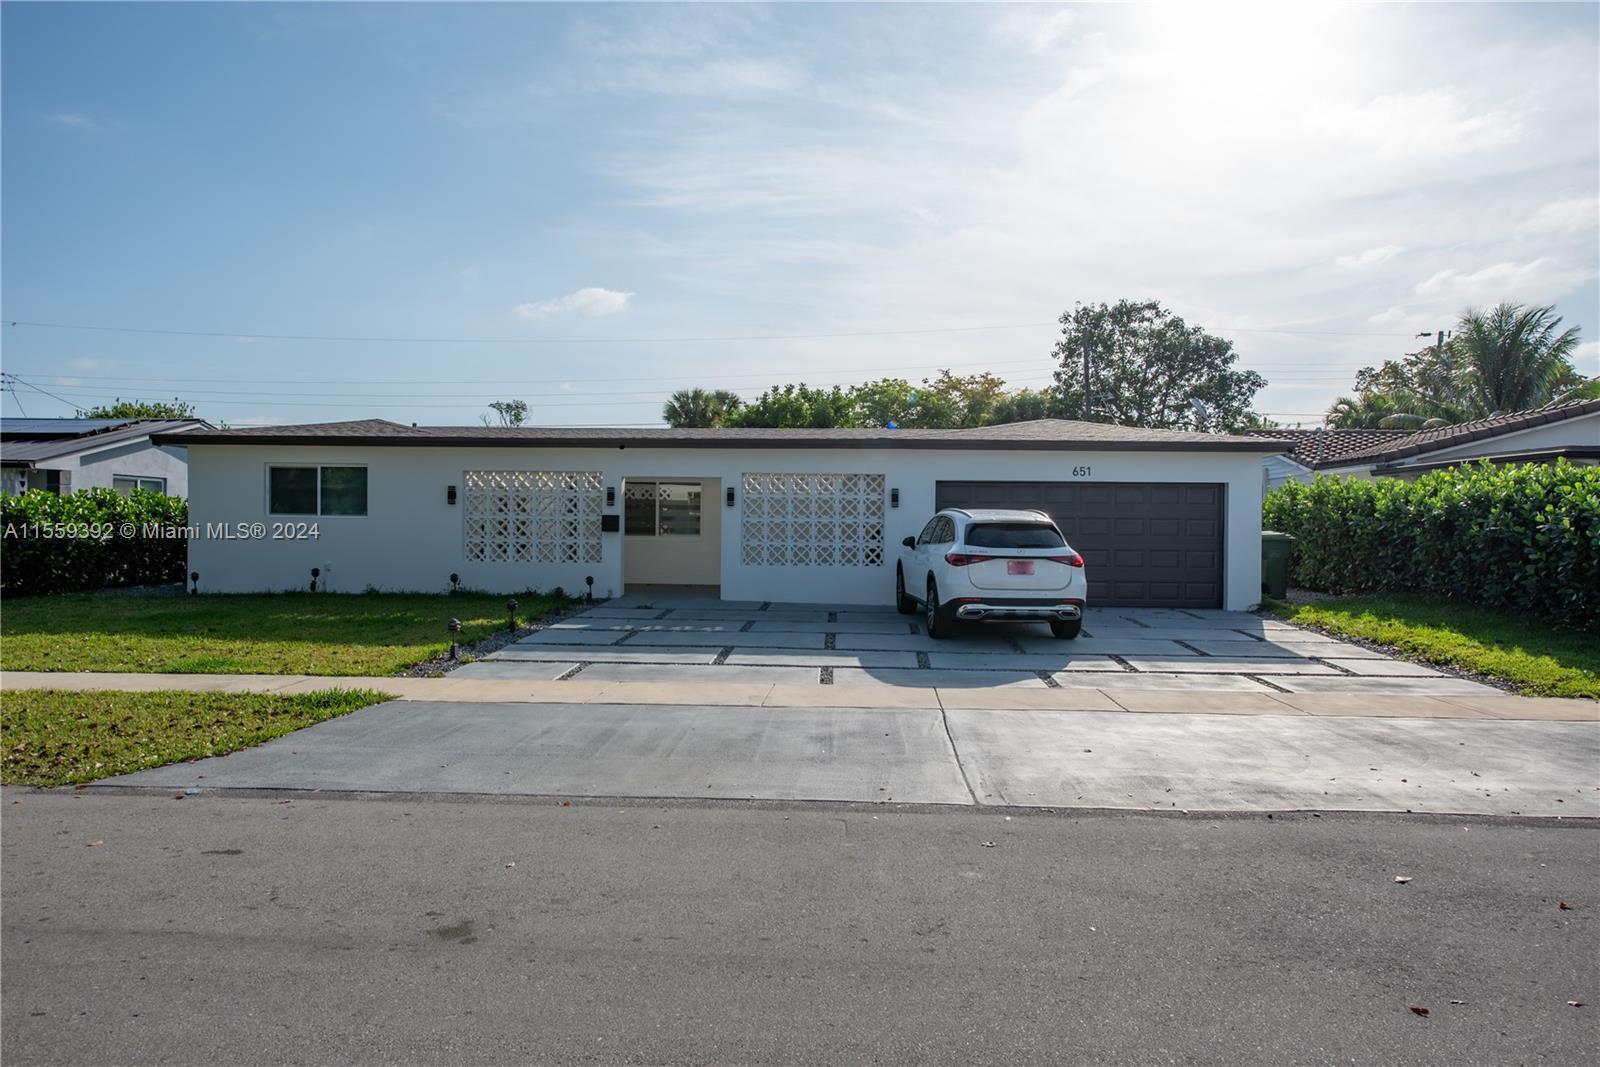 Photo of 651 SW 67th Ave in Pembroke Pines, FL